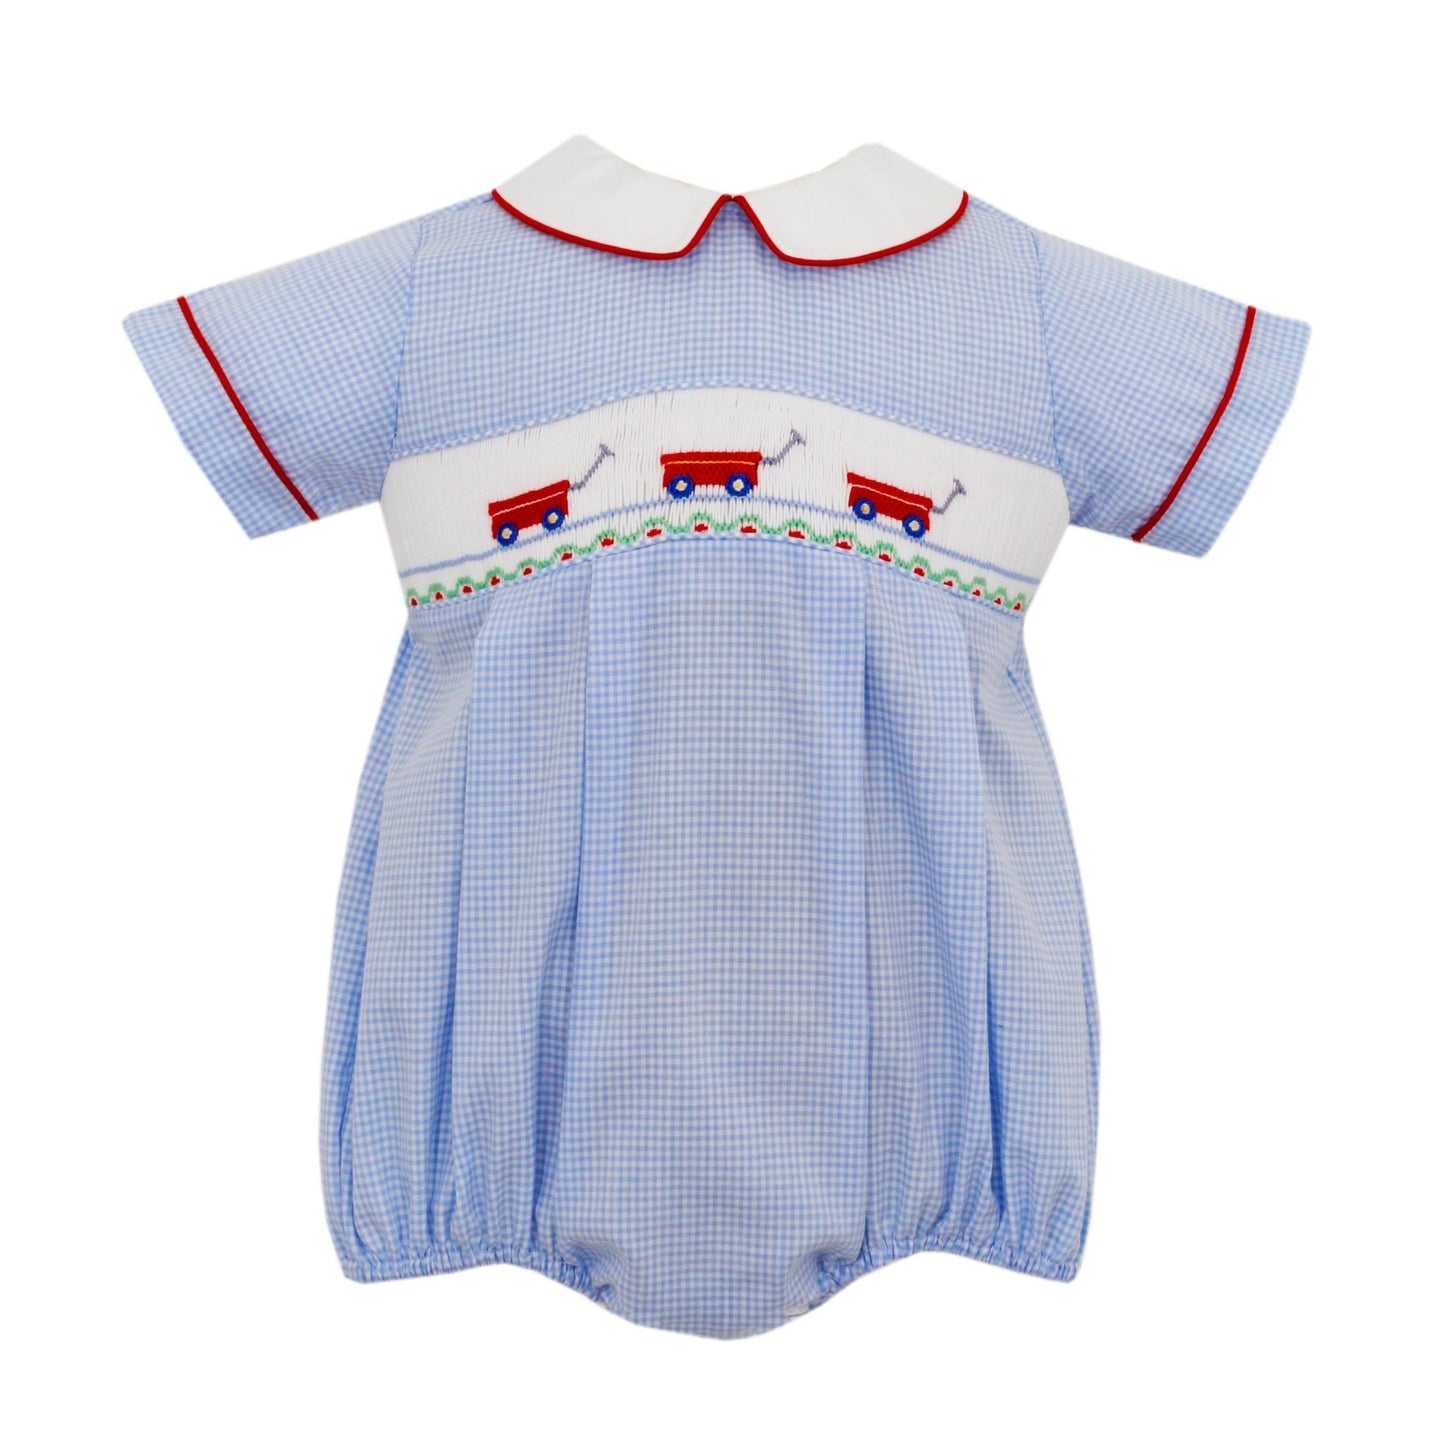 Boys Smocked Red Wagon Bubble